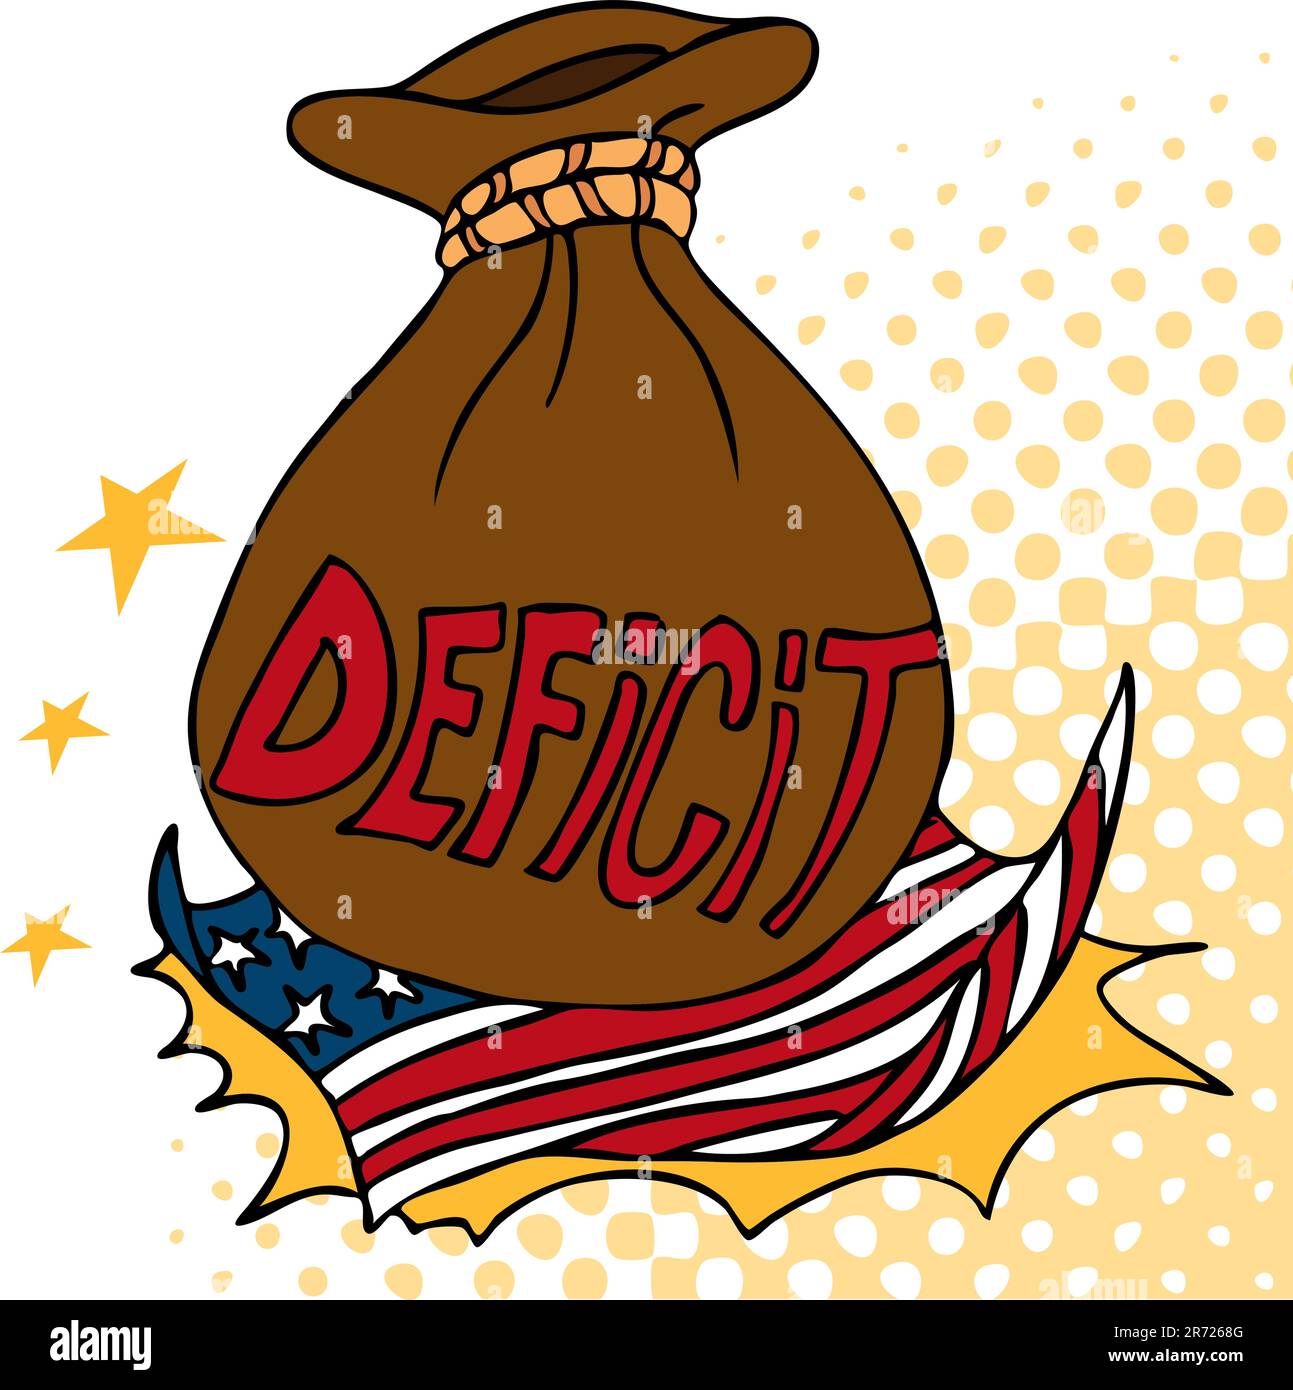 An image of a giant deficit bag crashing on an American flag. Stock Vector